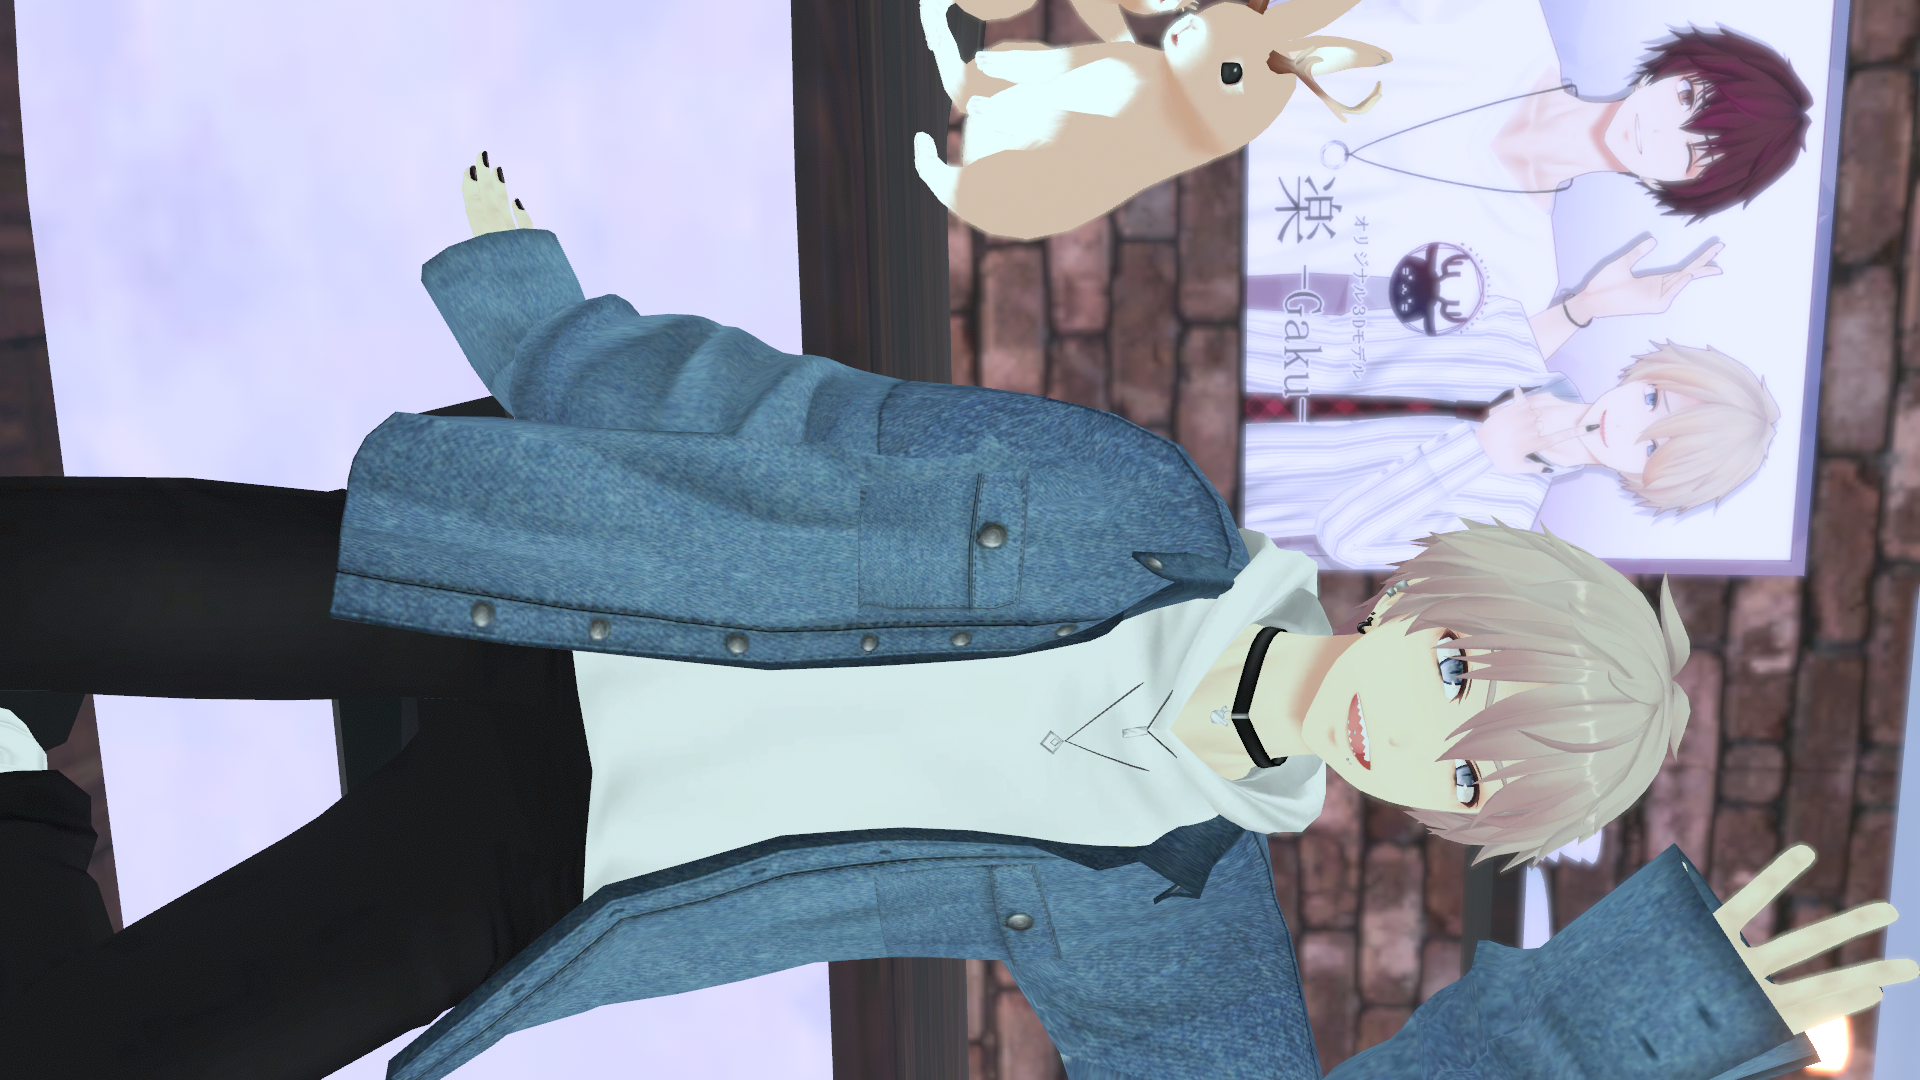 VRChat_1920x1080_2021-12-05_05-02-48.528.png